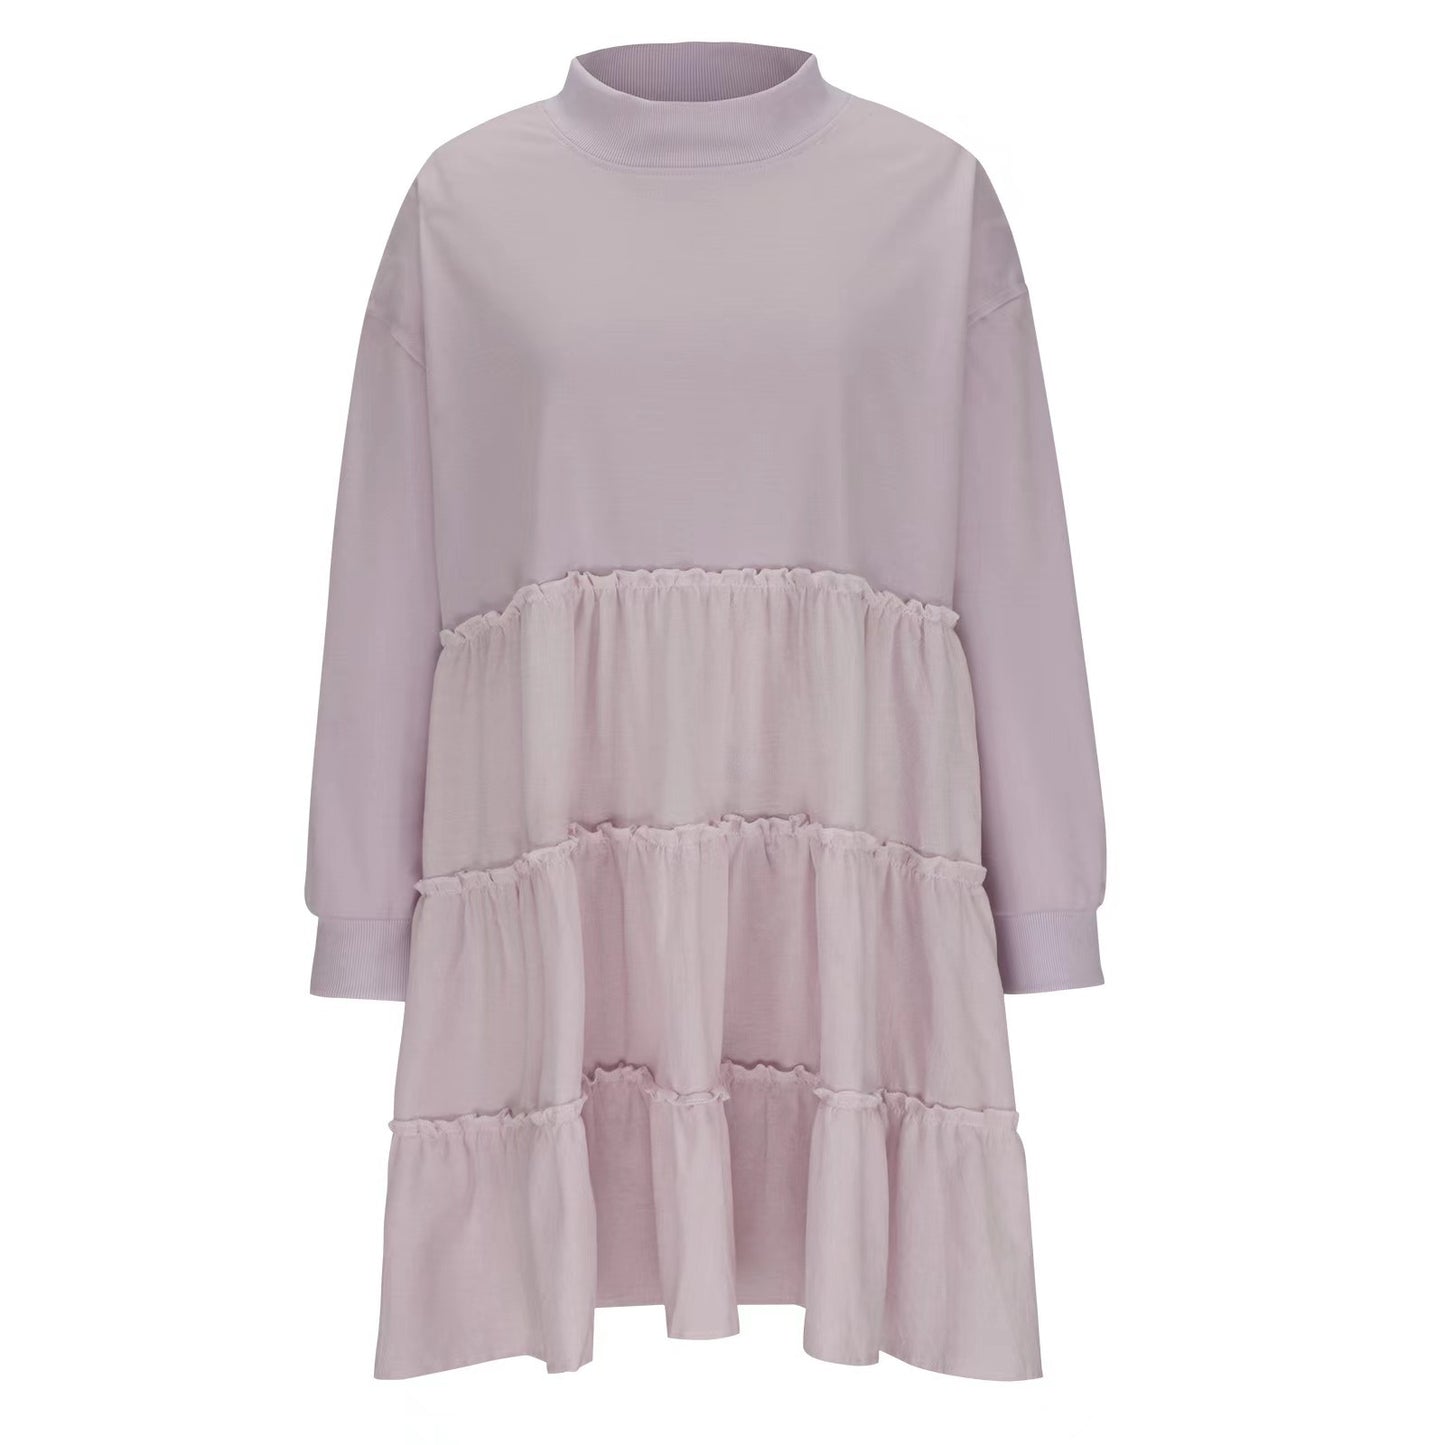 Loose-Fitting Pleated Sweater Dress with Stitching for Women